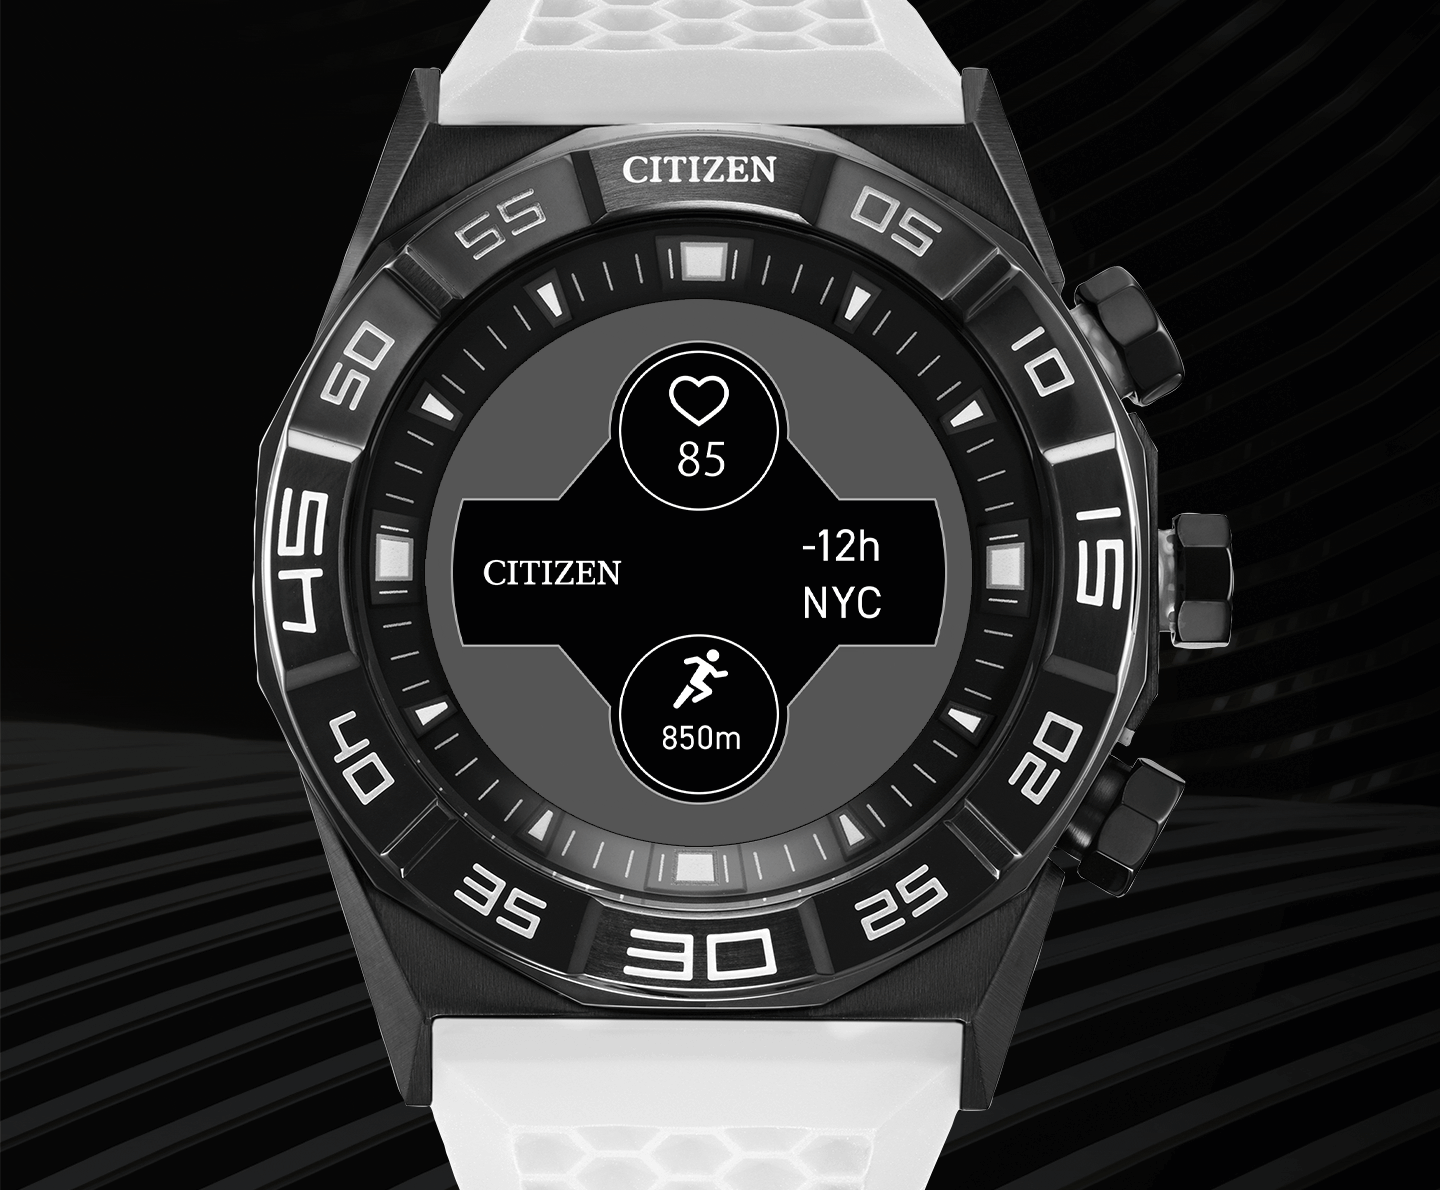 Citizen CZ Smart Gen Hybrid smartwatch 44mm, Continuous Heart Rate Tracking, Fitness Activity, Golf App, Displays Notifications and Messages, Blueto